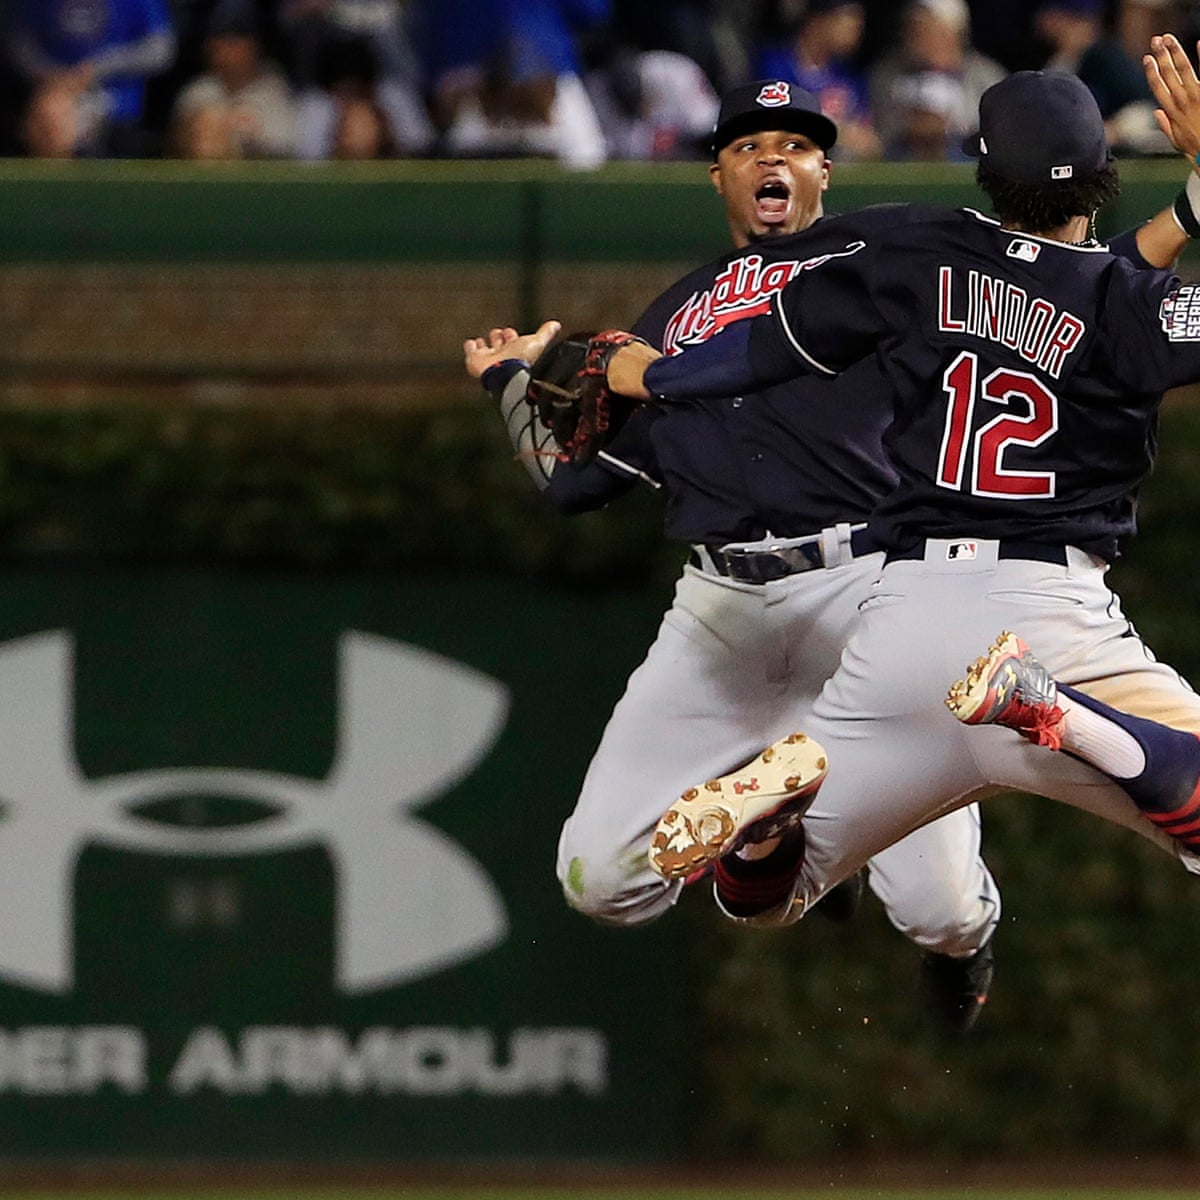 Indians power past Cubs to move to within one win of World Series